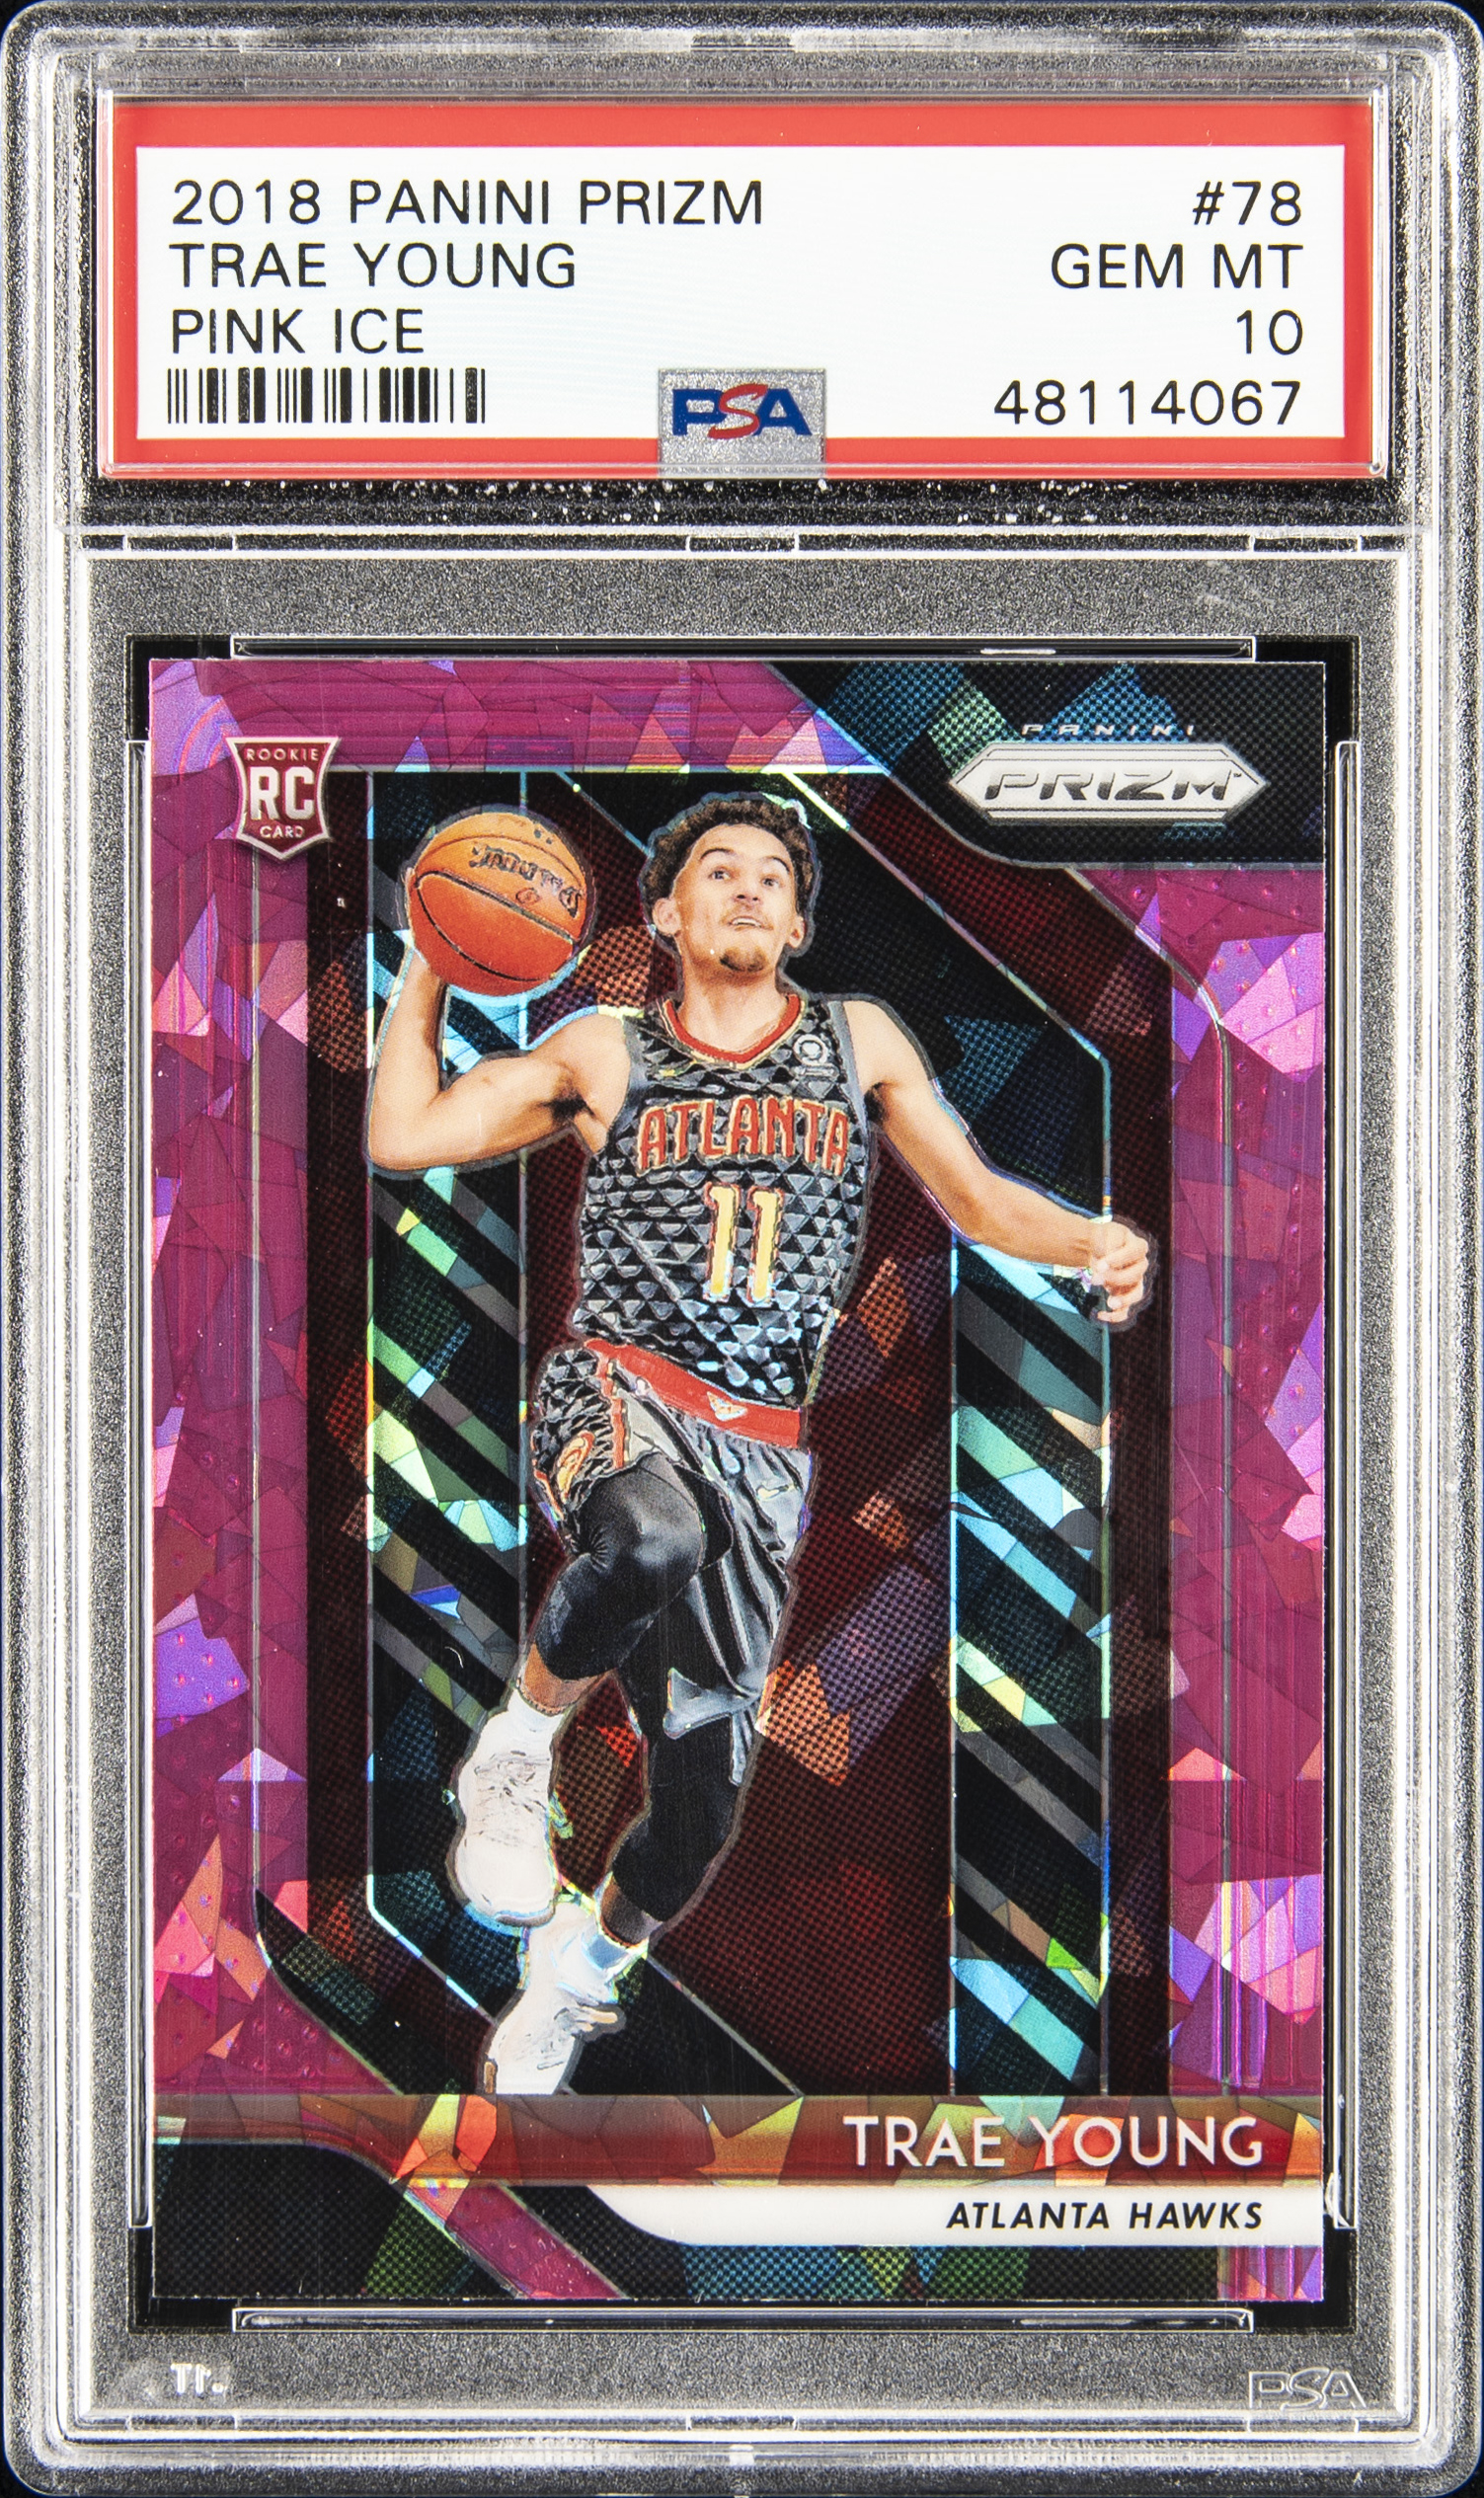 2018-19 Panini Prizm Pink Ice #78 Trae Young Rookie Card – PSA GEM MT 10